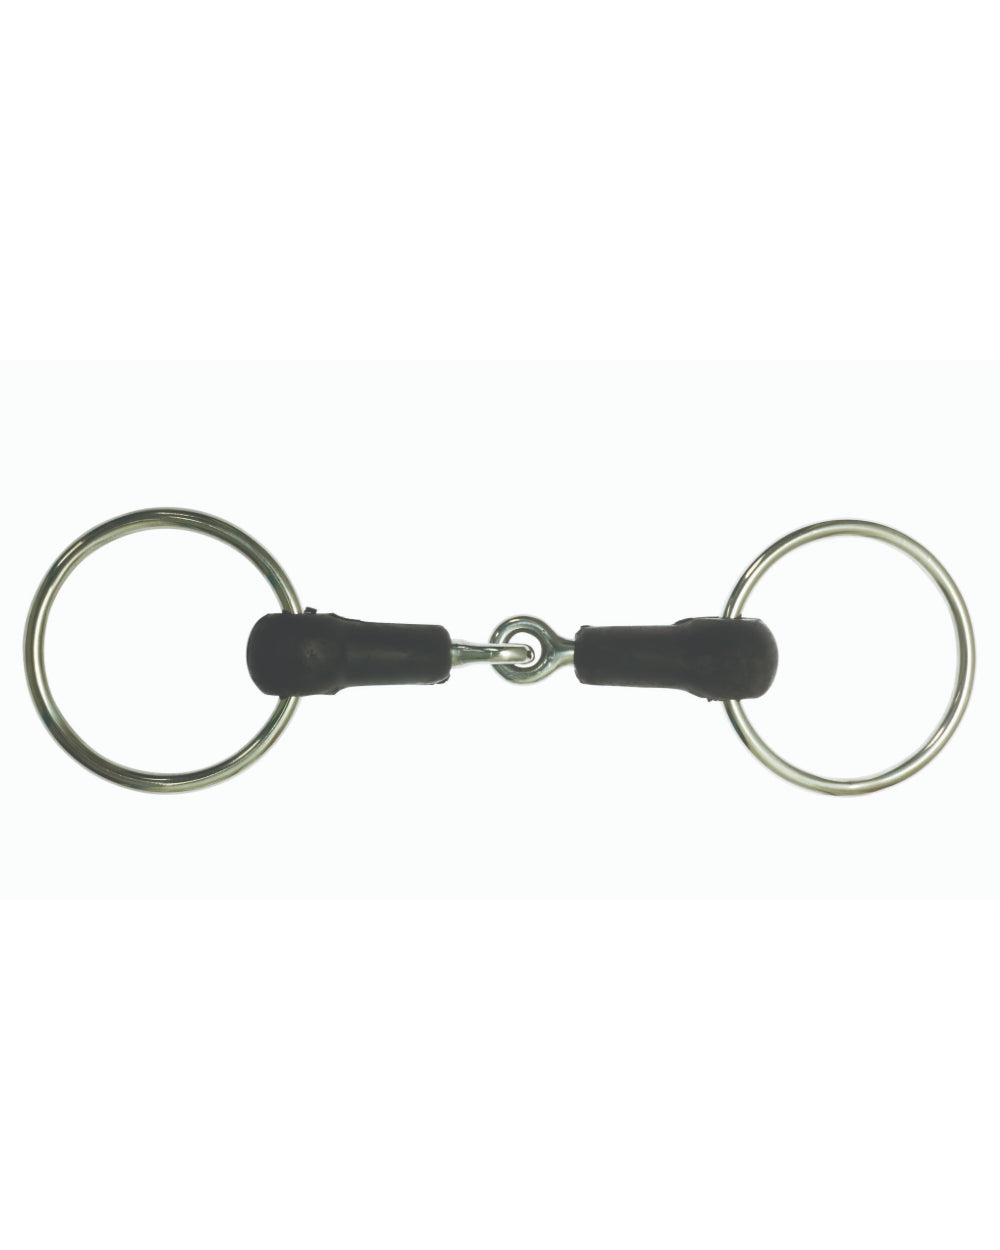 Korsteel Hard Rubber Jointed Loose Ring Snaffle Bit on white background